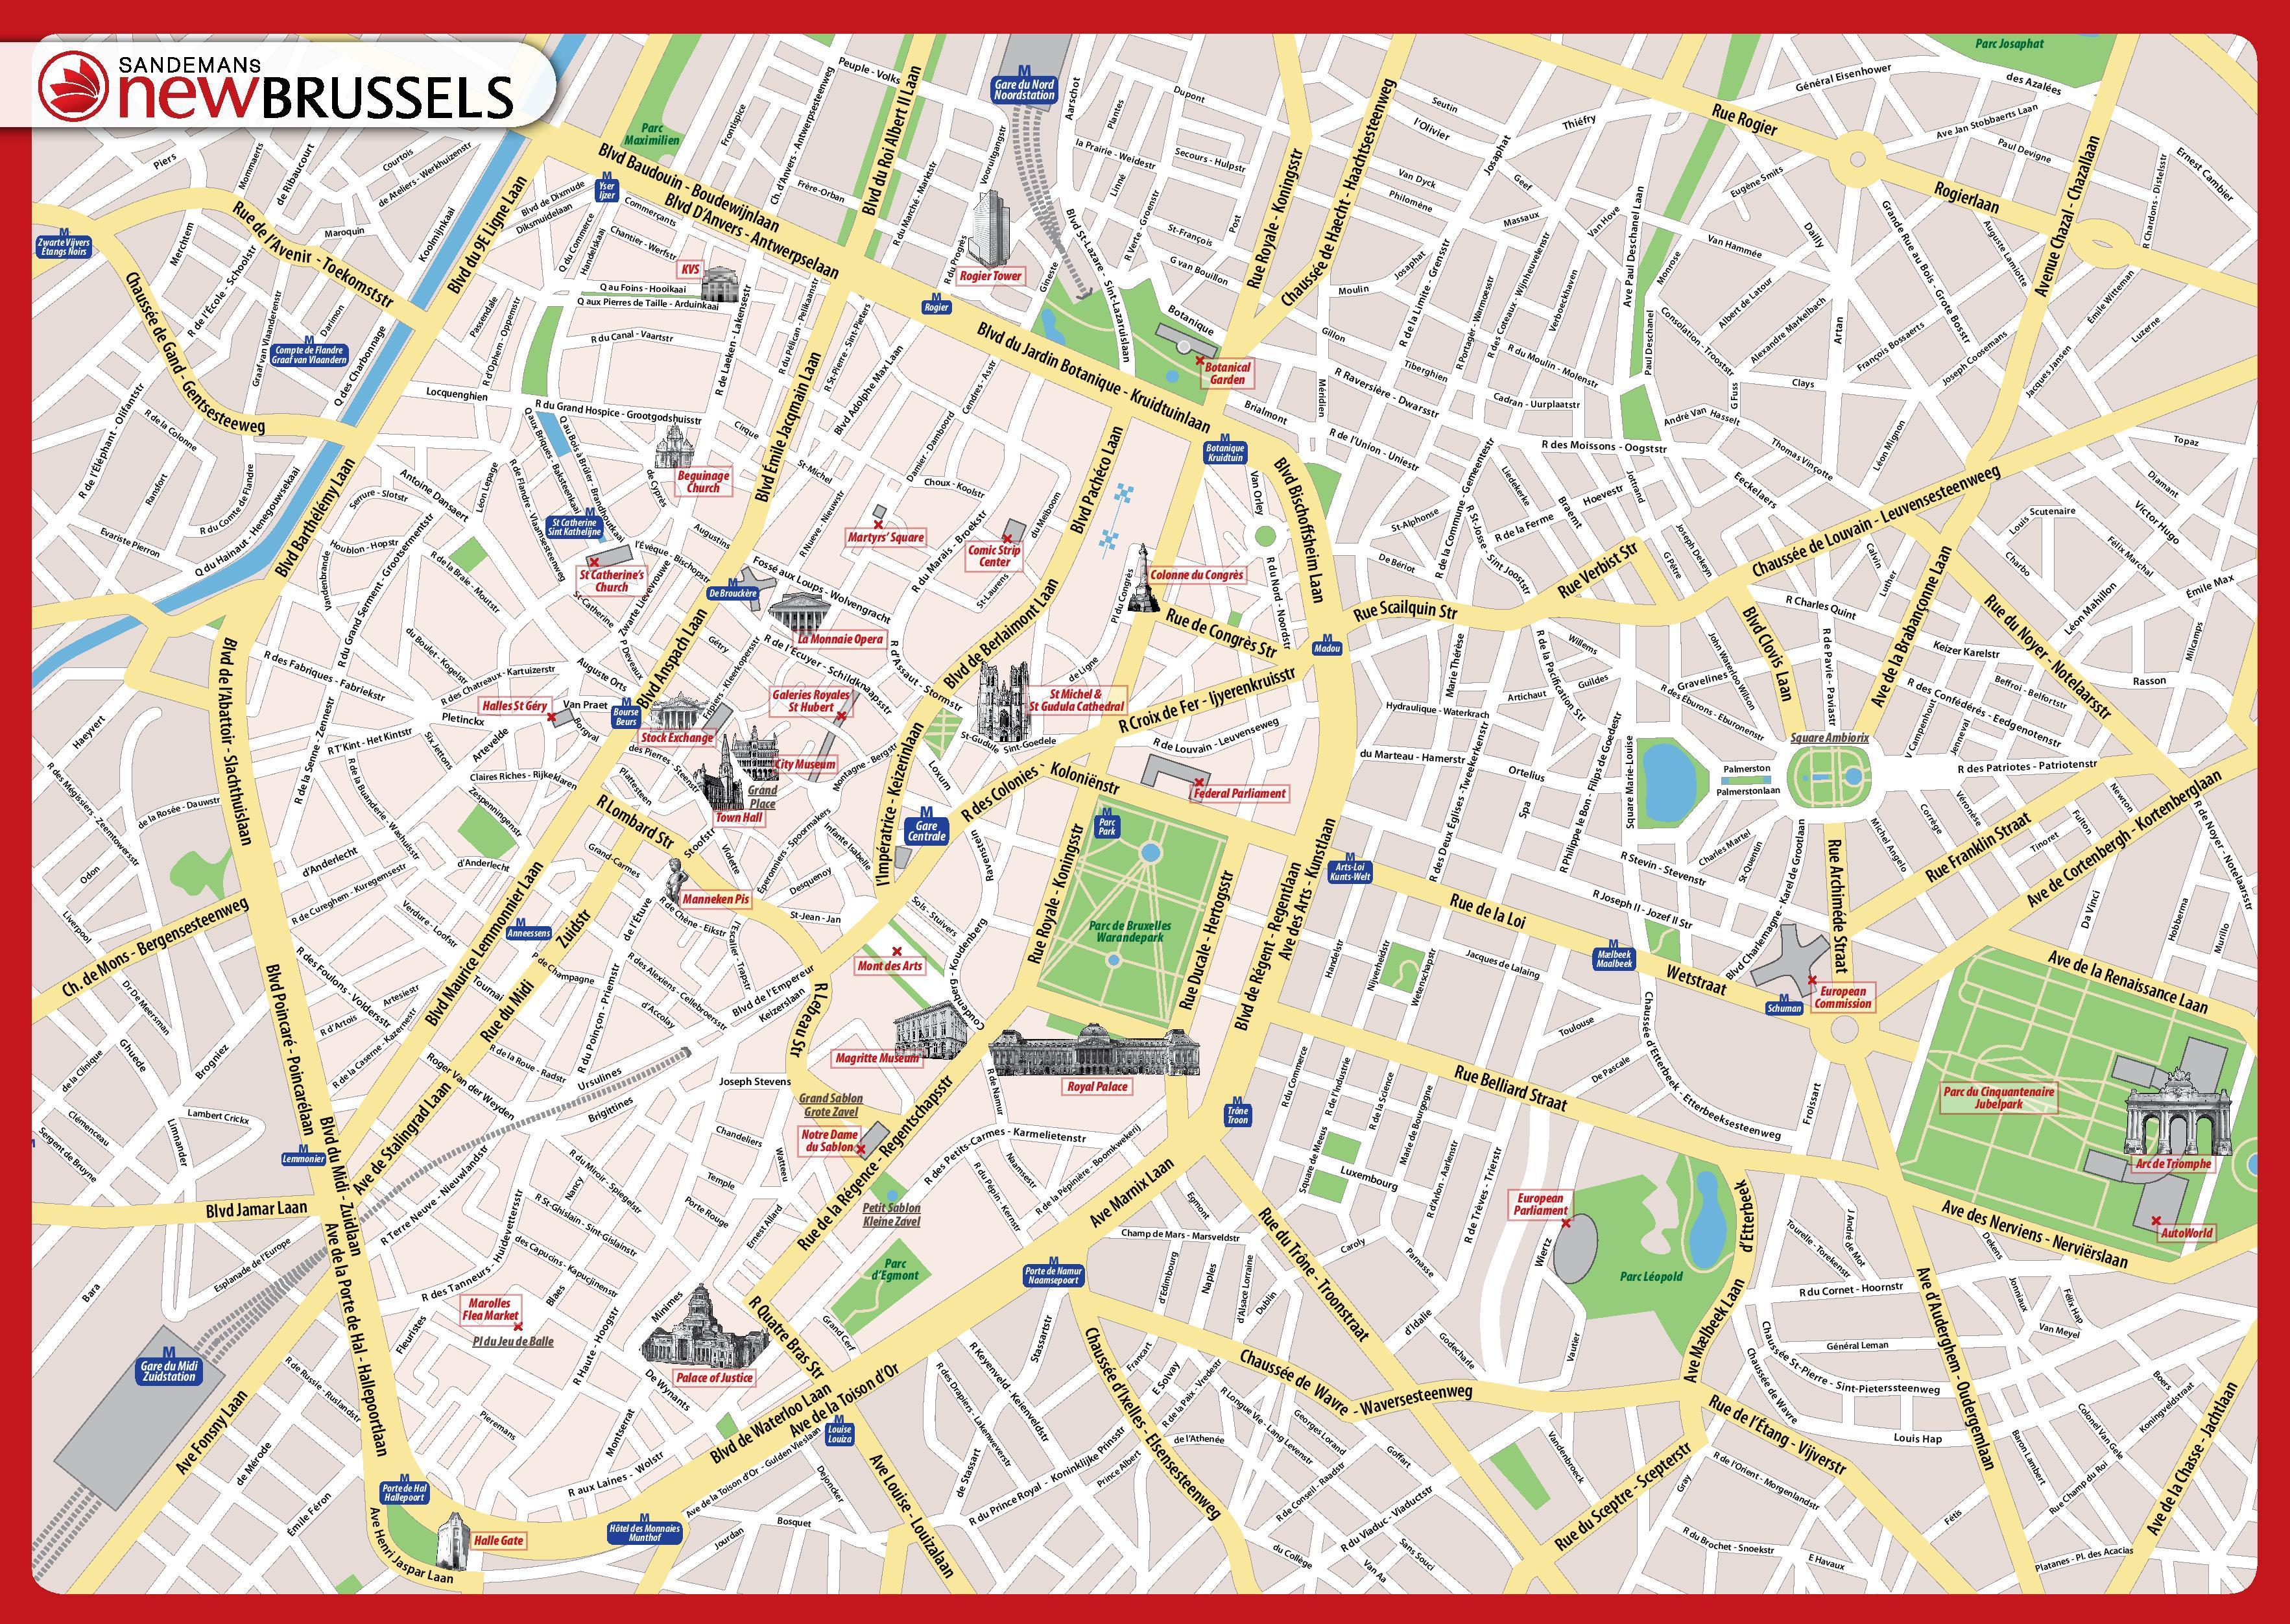 brussels-attractions-map-pdf-free-printable-tourist-map-brussels-waking-tours-maps-2020